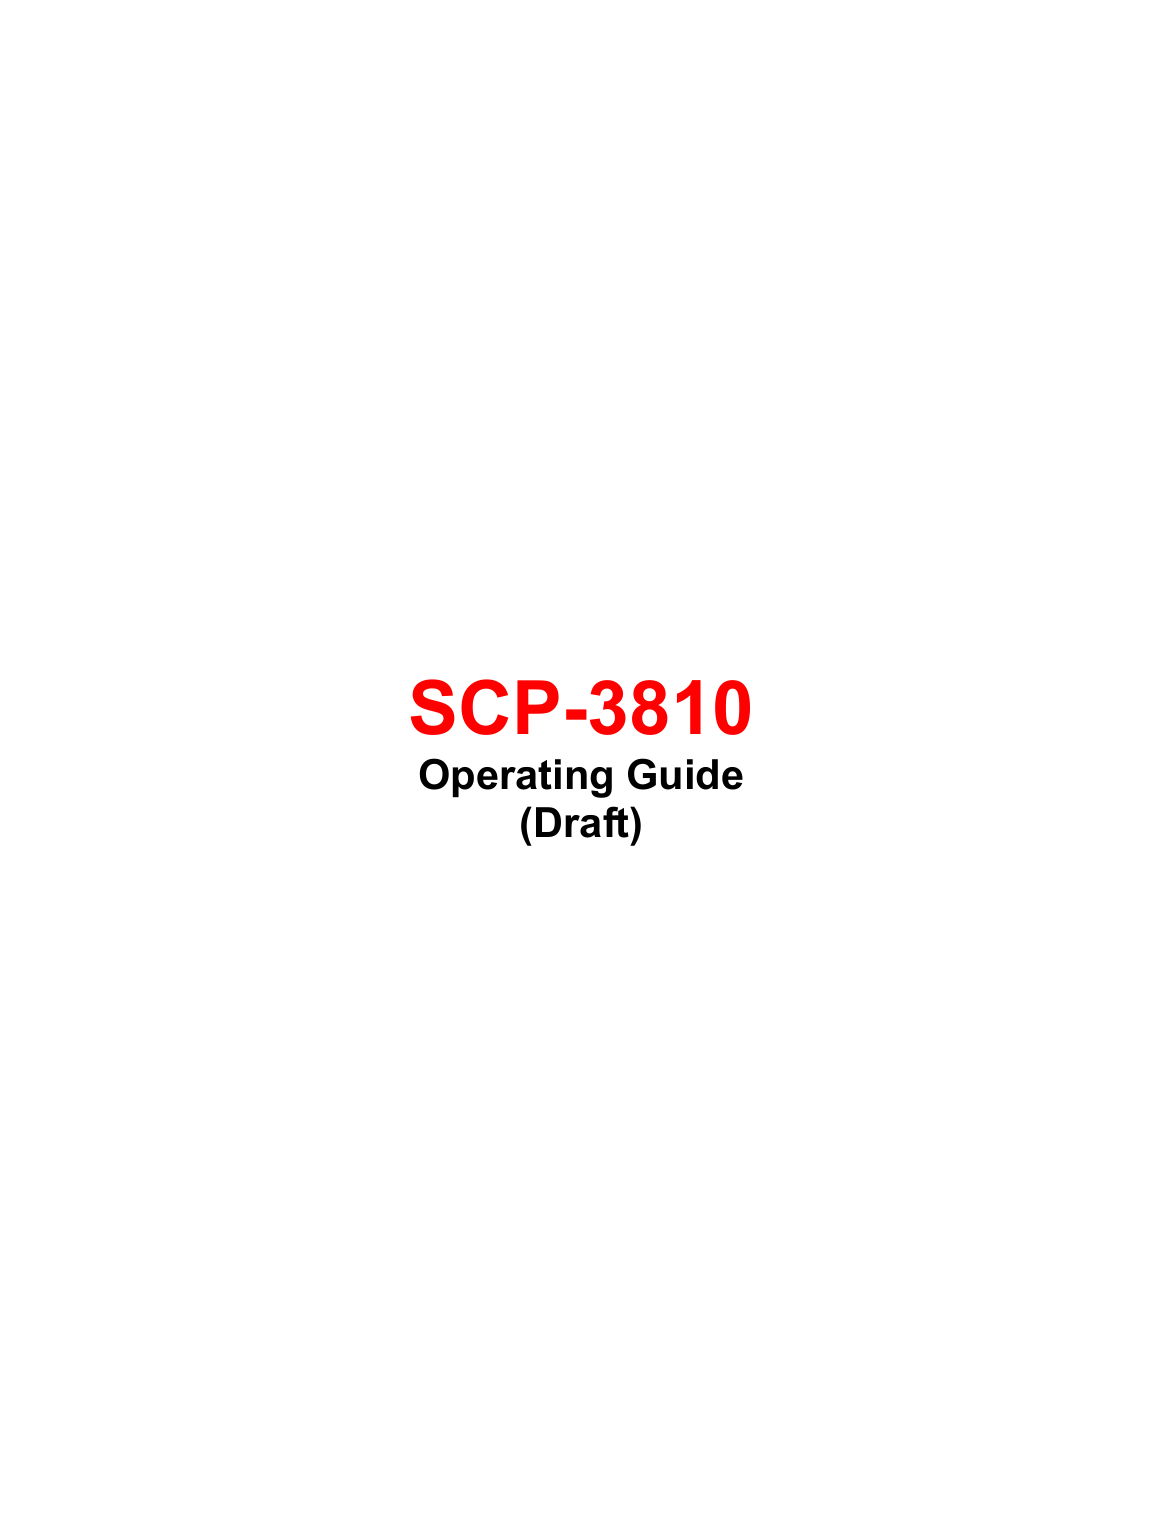                   SCP-3810 Operating Guide (Draft) 